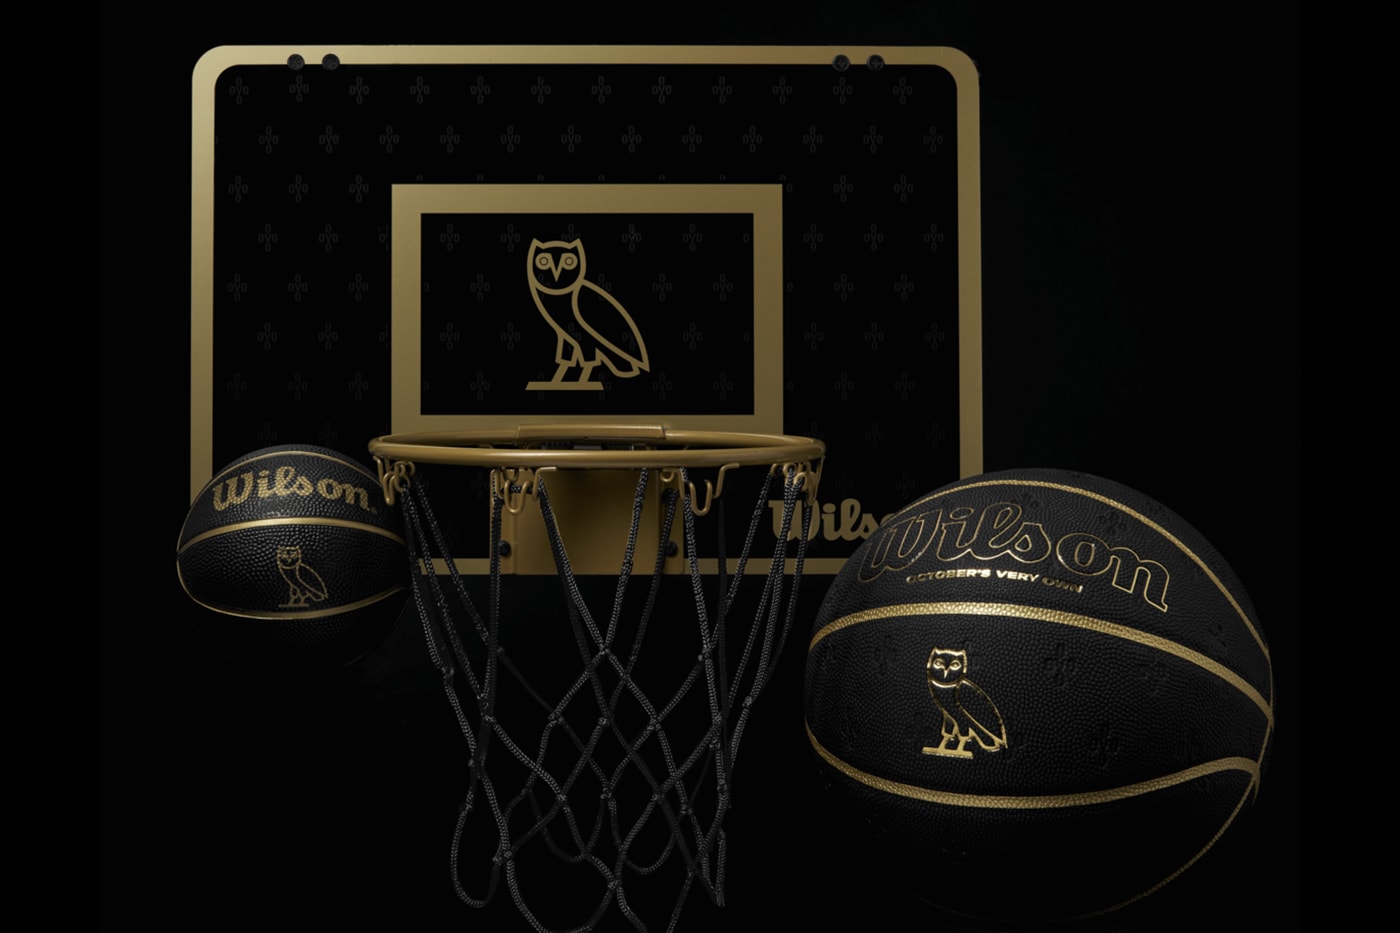 Wilson OVO octobers very own hoop basketball ball drake limited edition black gold release info date price